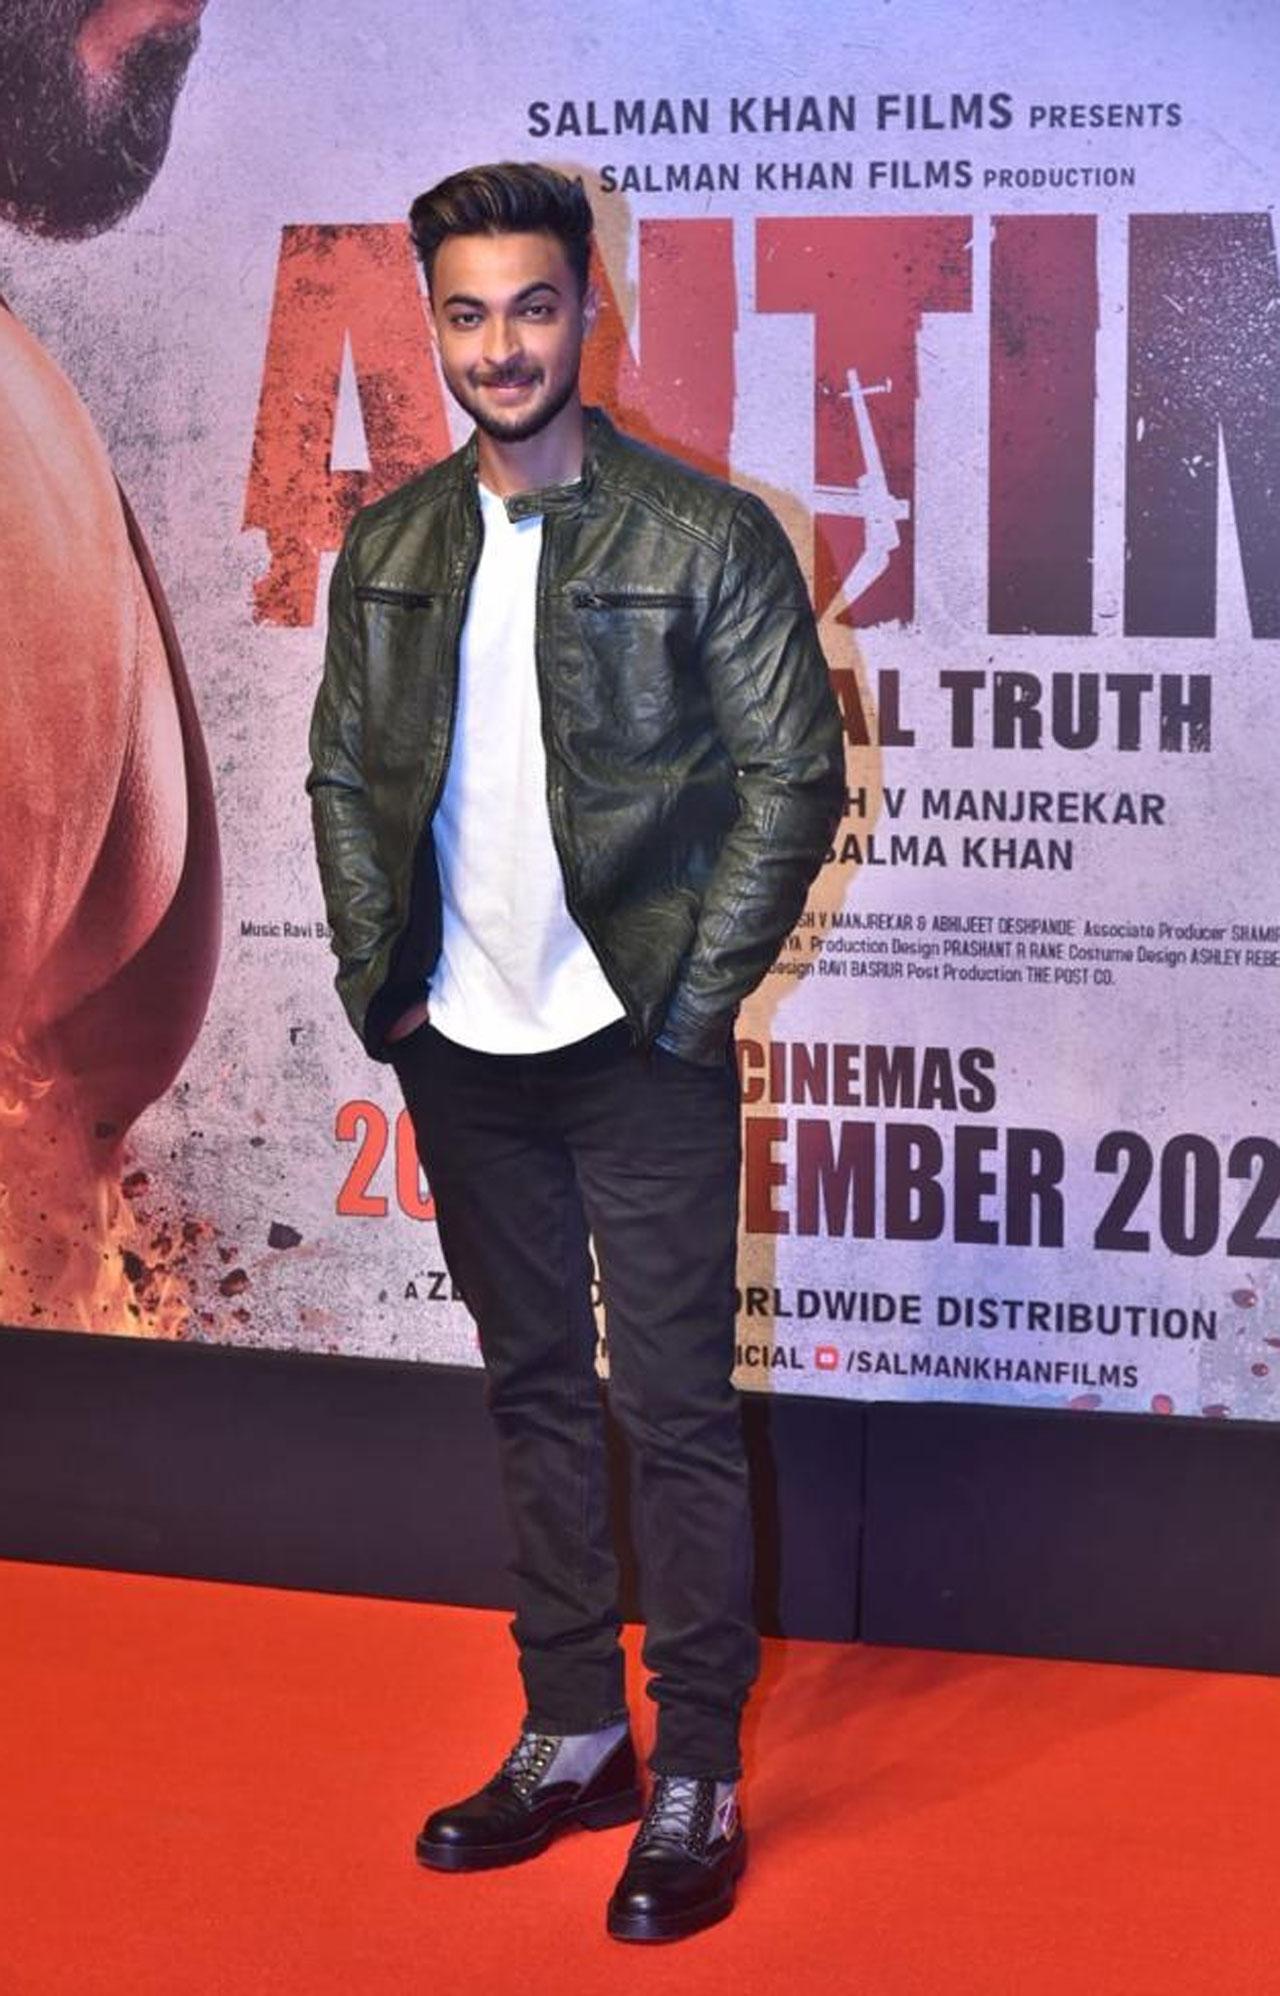 The leading man Aayush Sharma posed for the paparazzi before heading to watch his second film after Loveyatri. He was dressed in a dark green jacket and smiled for the media as he was clicked on the red carpet.